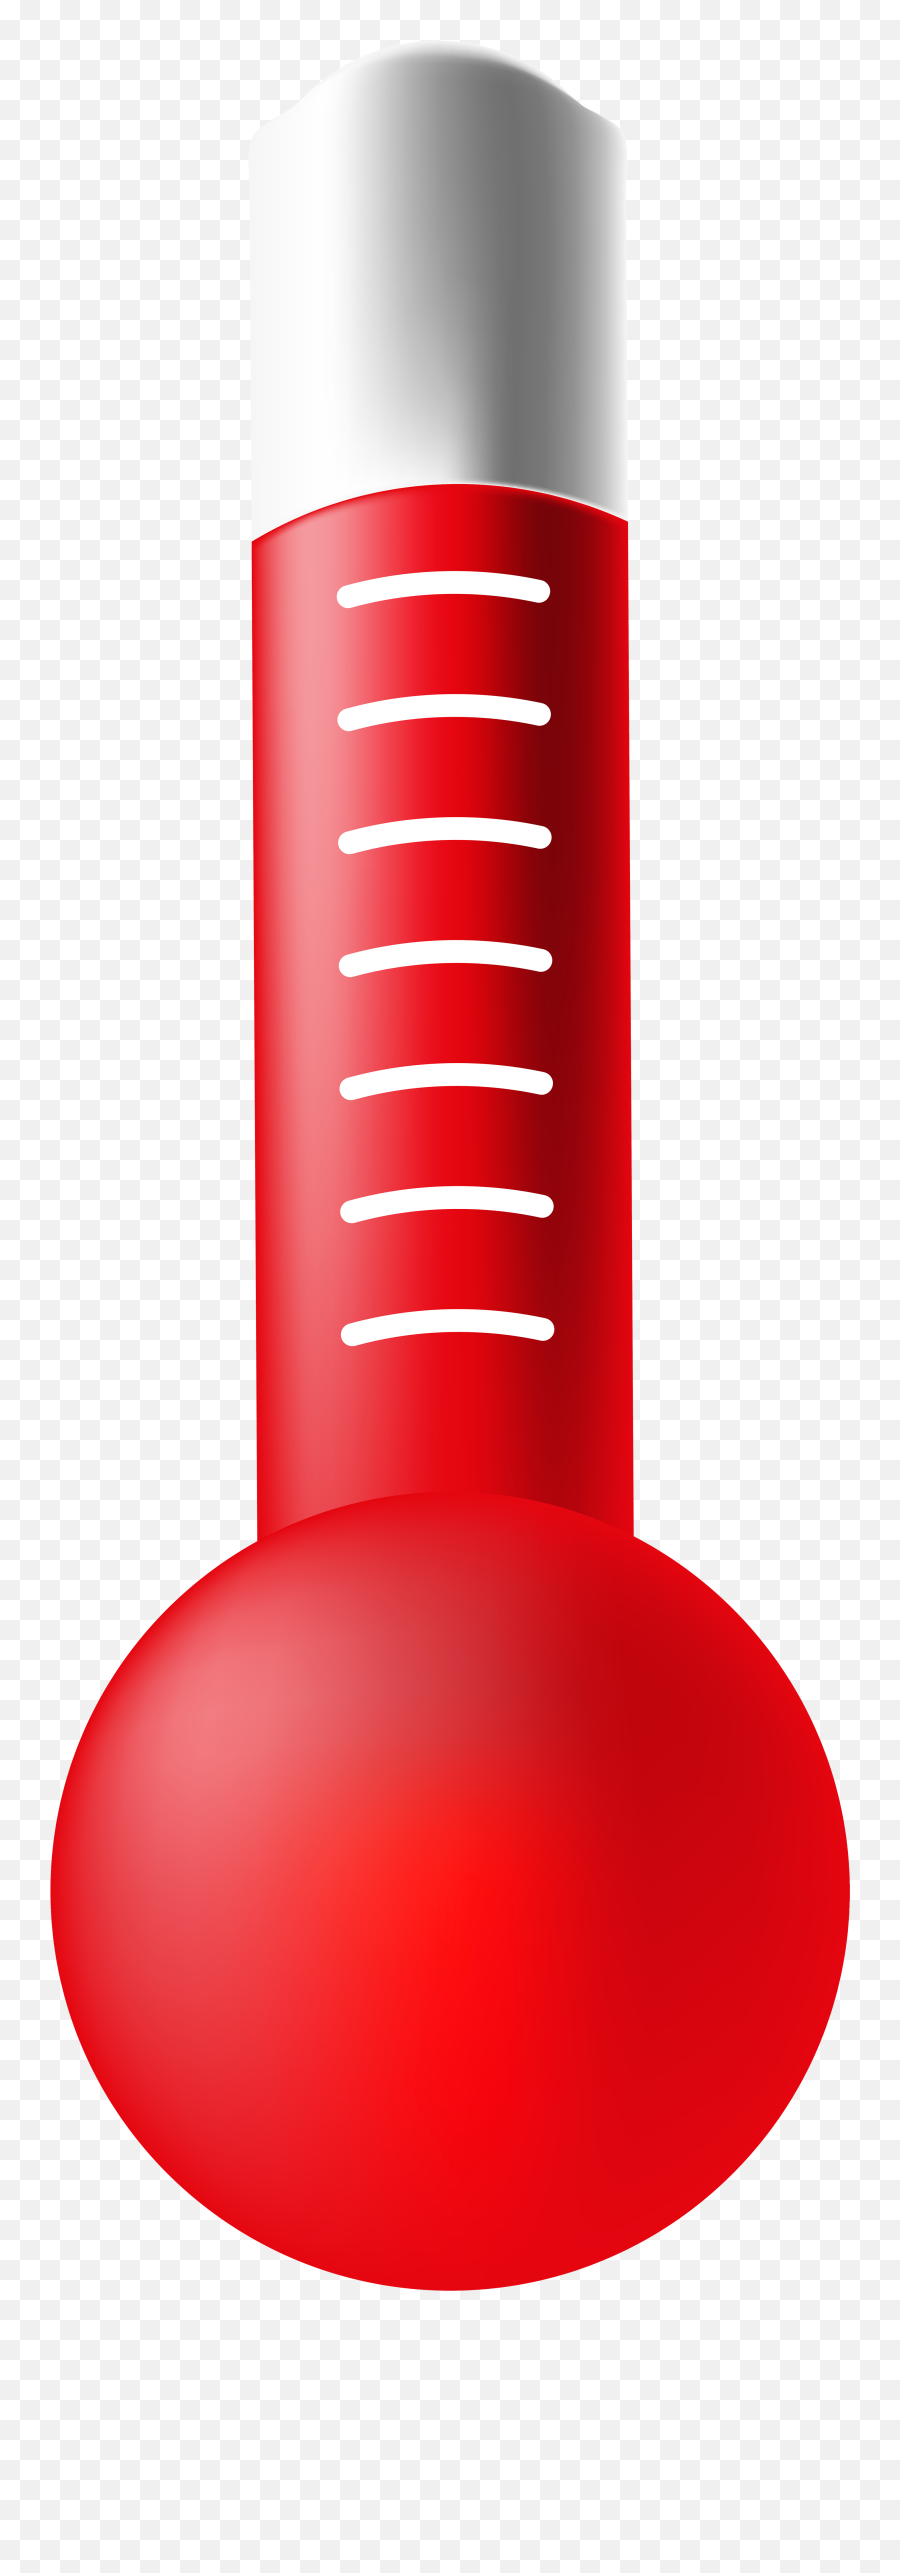 Hot Thermometer Weather Icon Png Clip - Abs Cbn Emoji,Thermometer Clipart